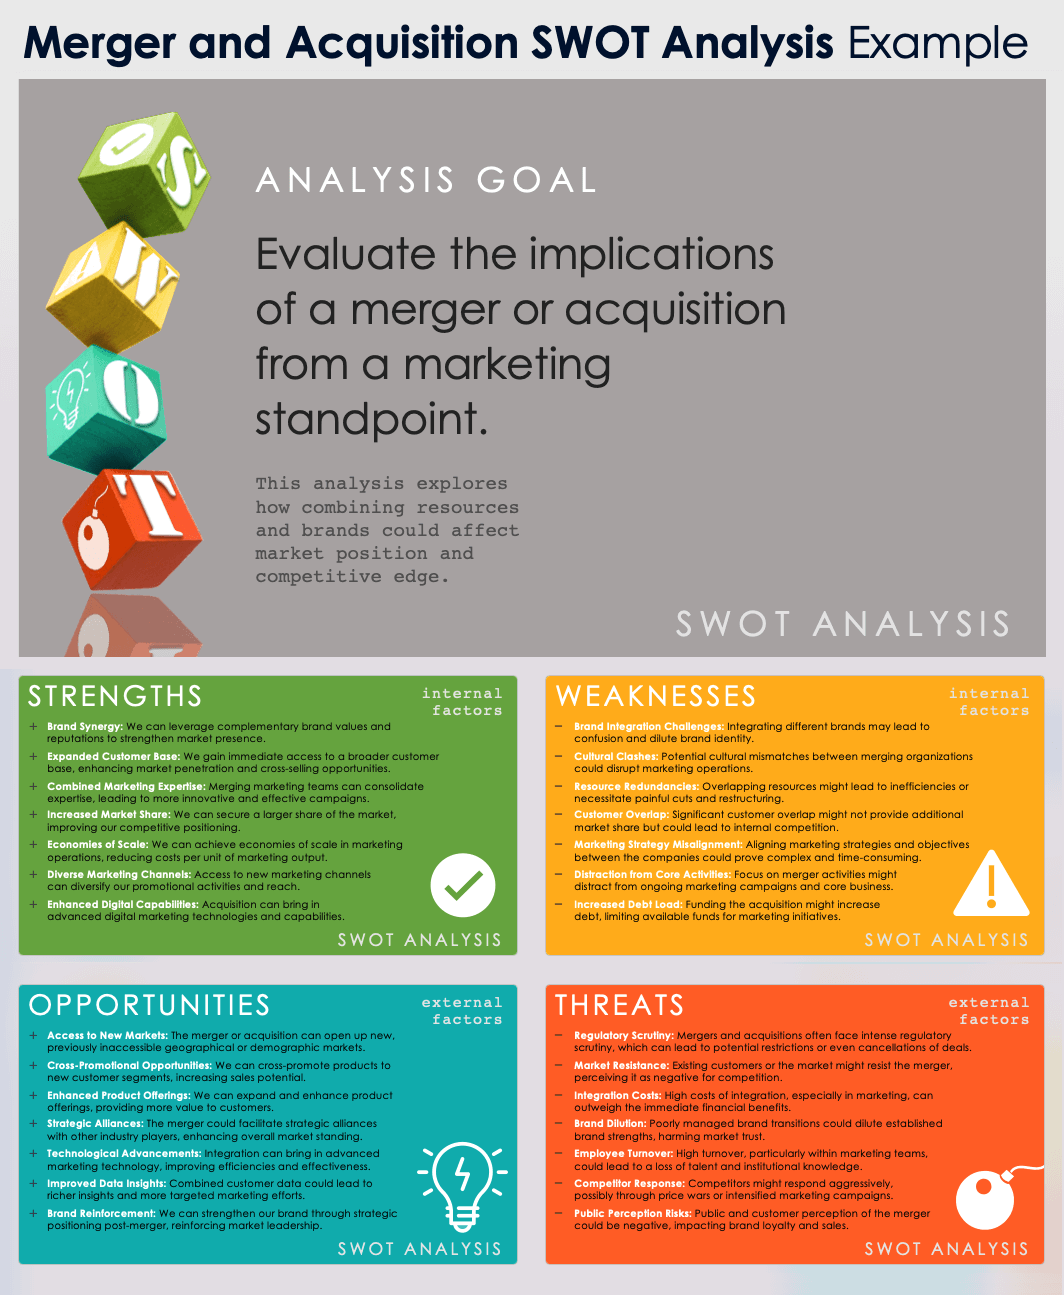 Merger and Acquisition SWOT Analysis Example